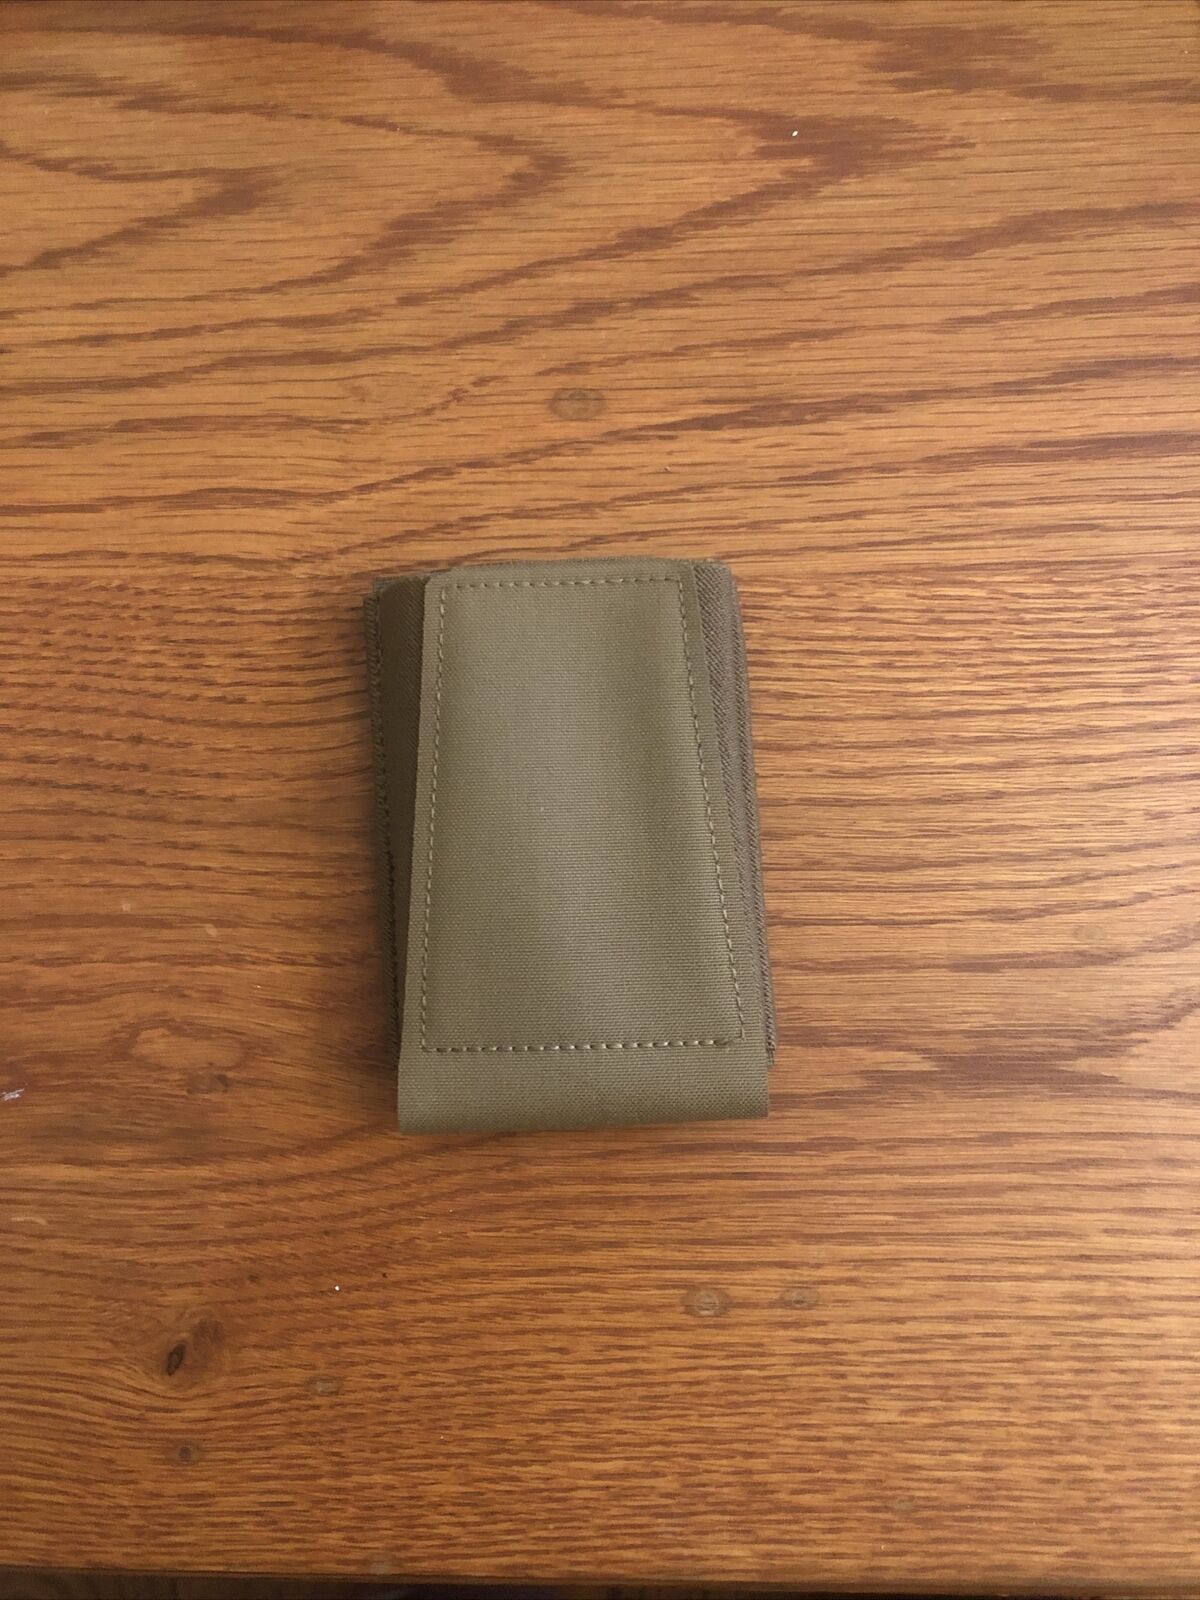 GBRS Single Rifle Magazine Pouch (Coyote Brown)